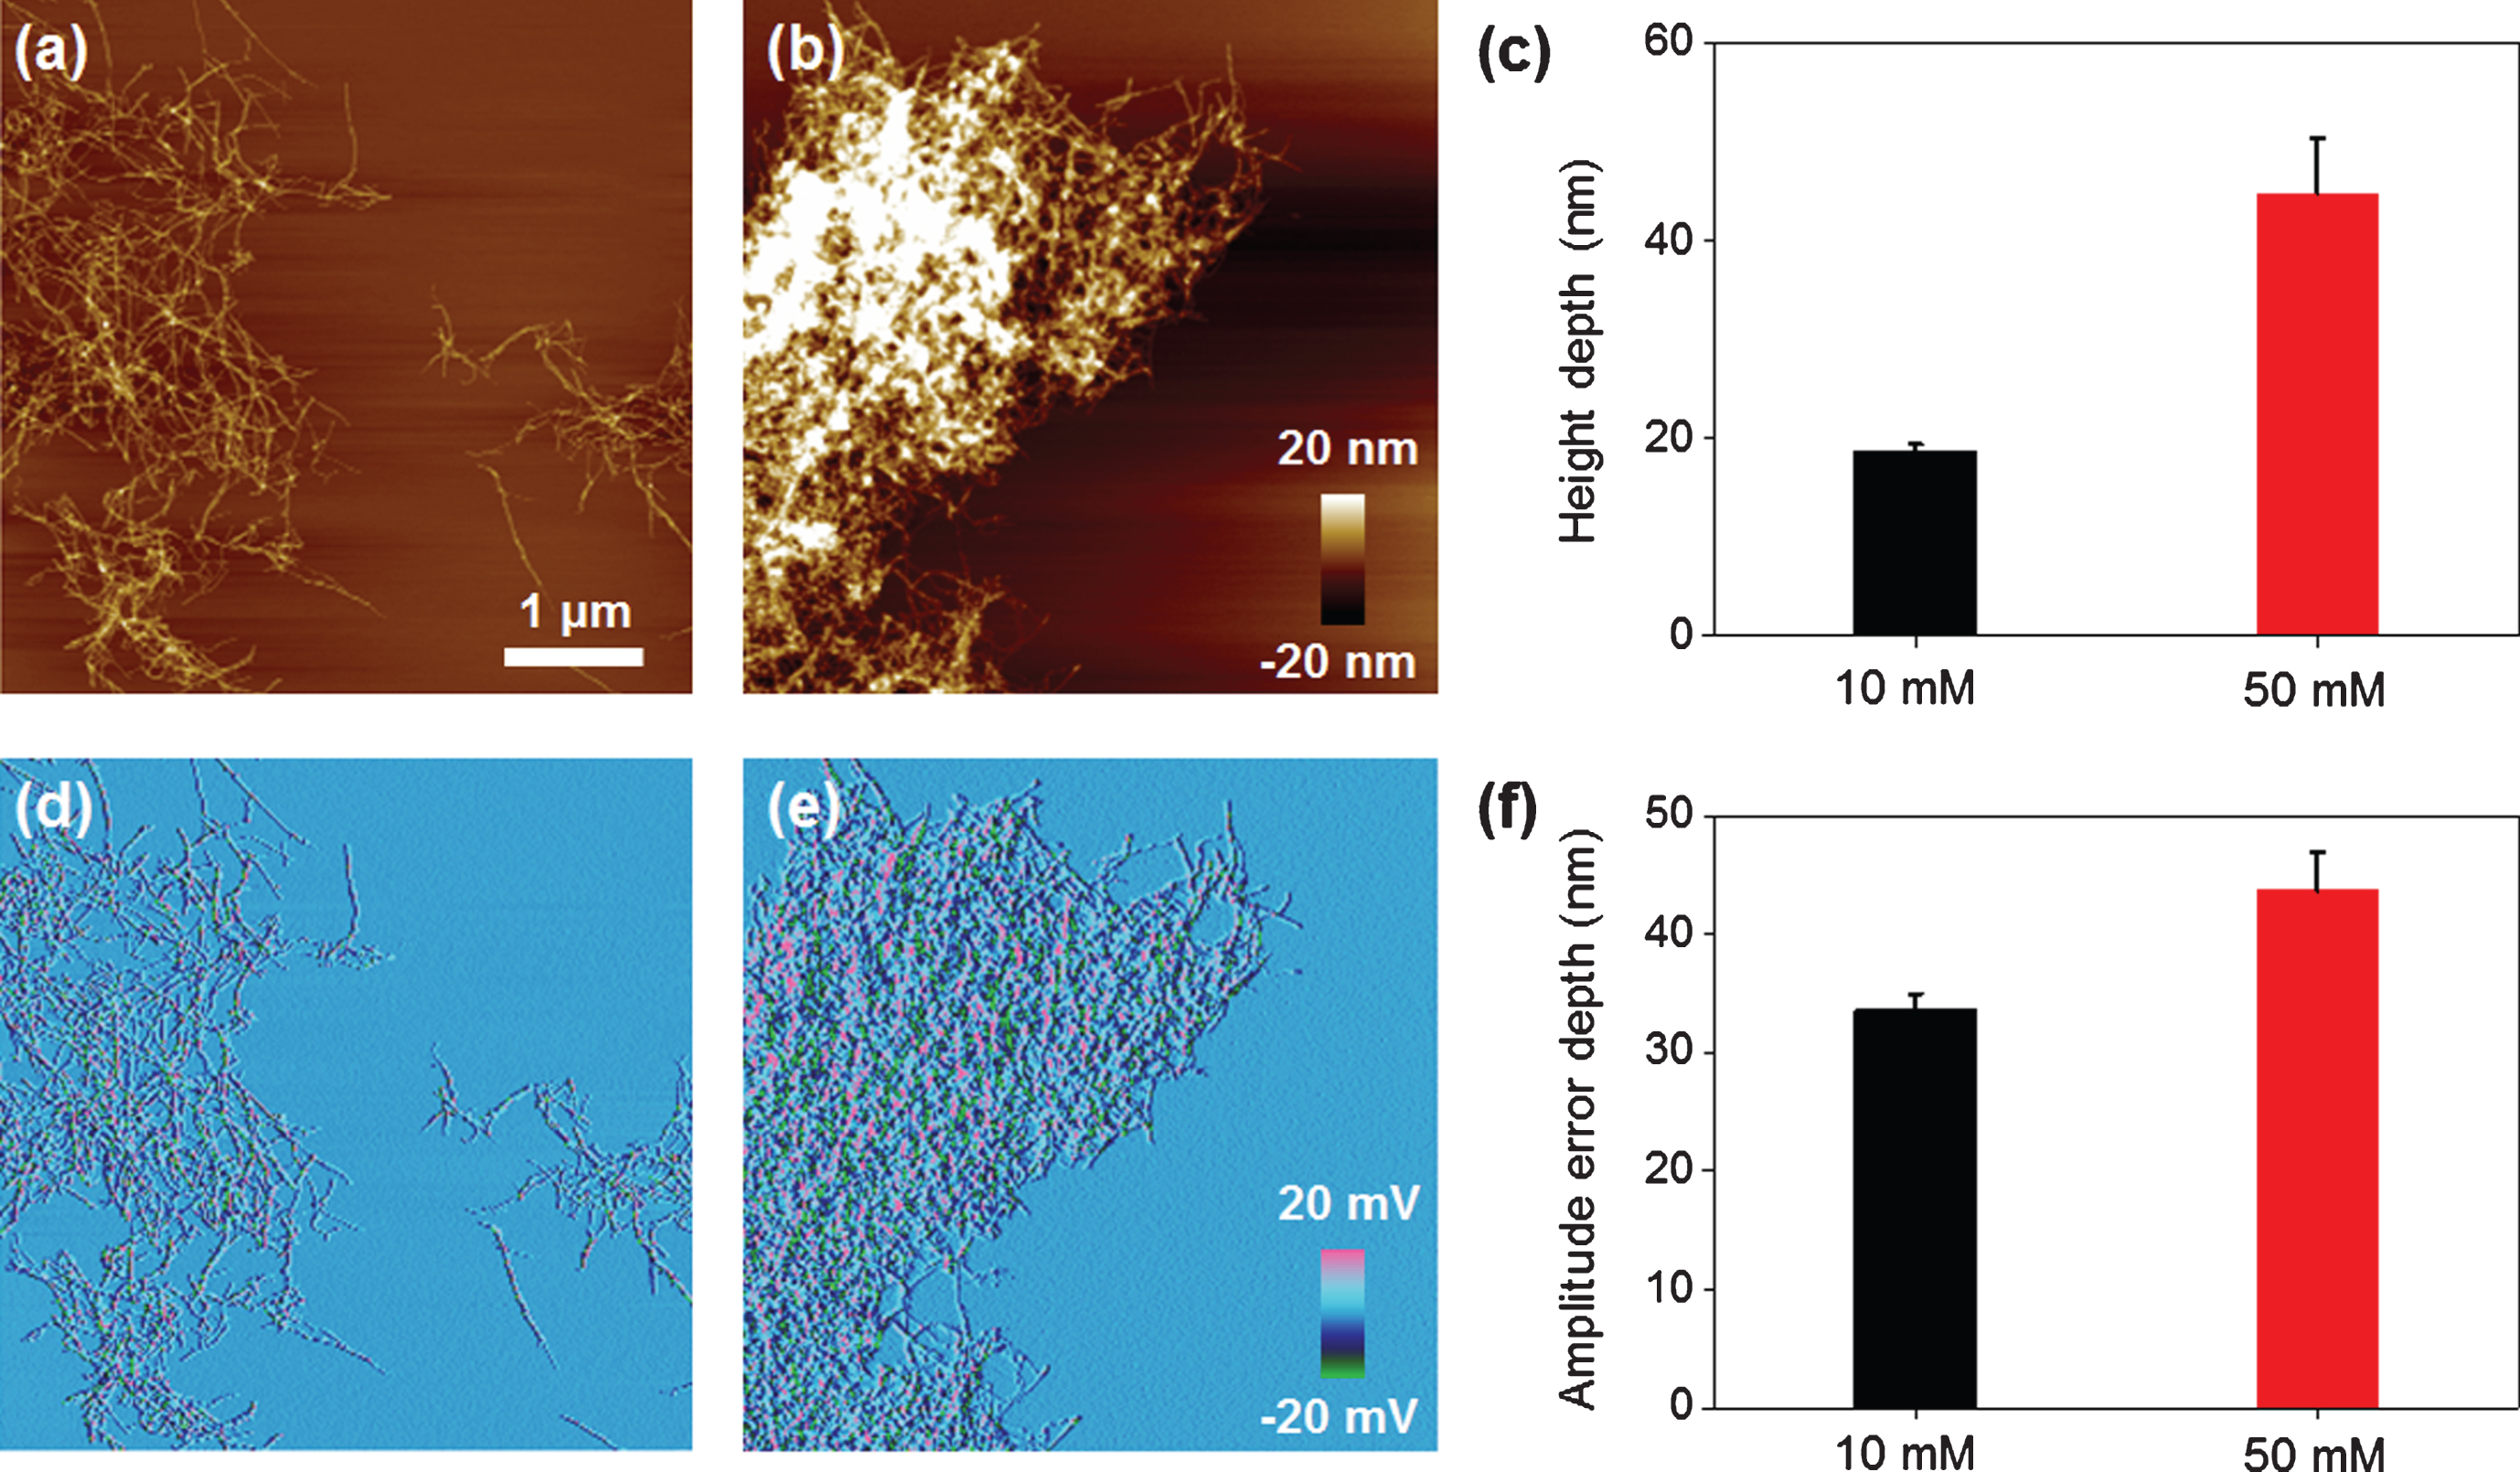 Characterization of structural information of re-formed Aβ aggregates depending on EPPS treatment by using AFM images. Topological images of Aβ aggregates by (a) 10 and (b) 50 mM EPPS treatment for 1 day. (c) Average height depth of Aβ aggregates. Amplitude error images of Aβ aggregates by (d) 10 and (e) 50 mM EPPS treatment for 1 day. (f) Average amplitude error depth of Aβ aggregates.